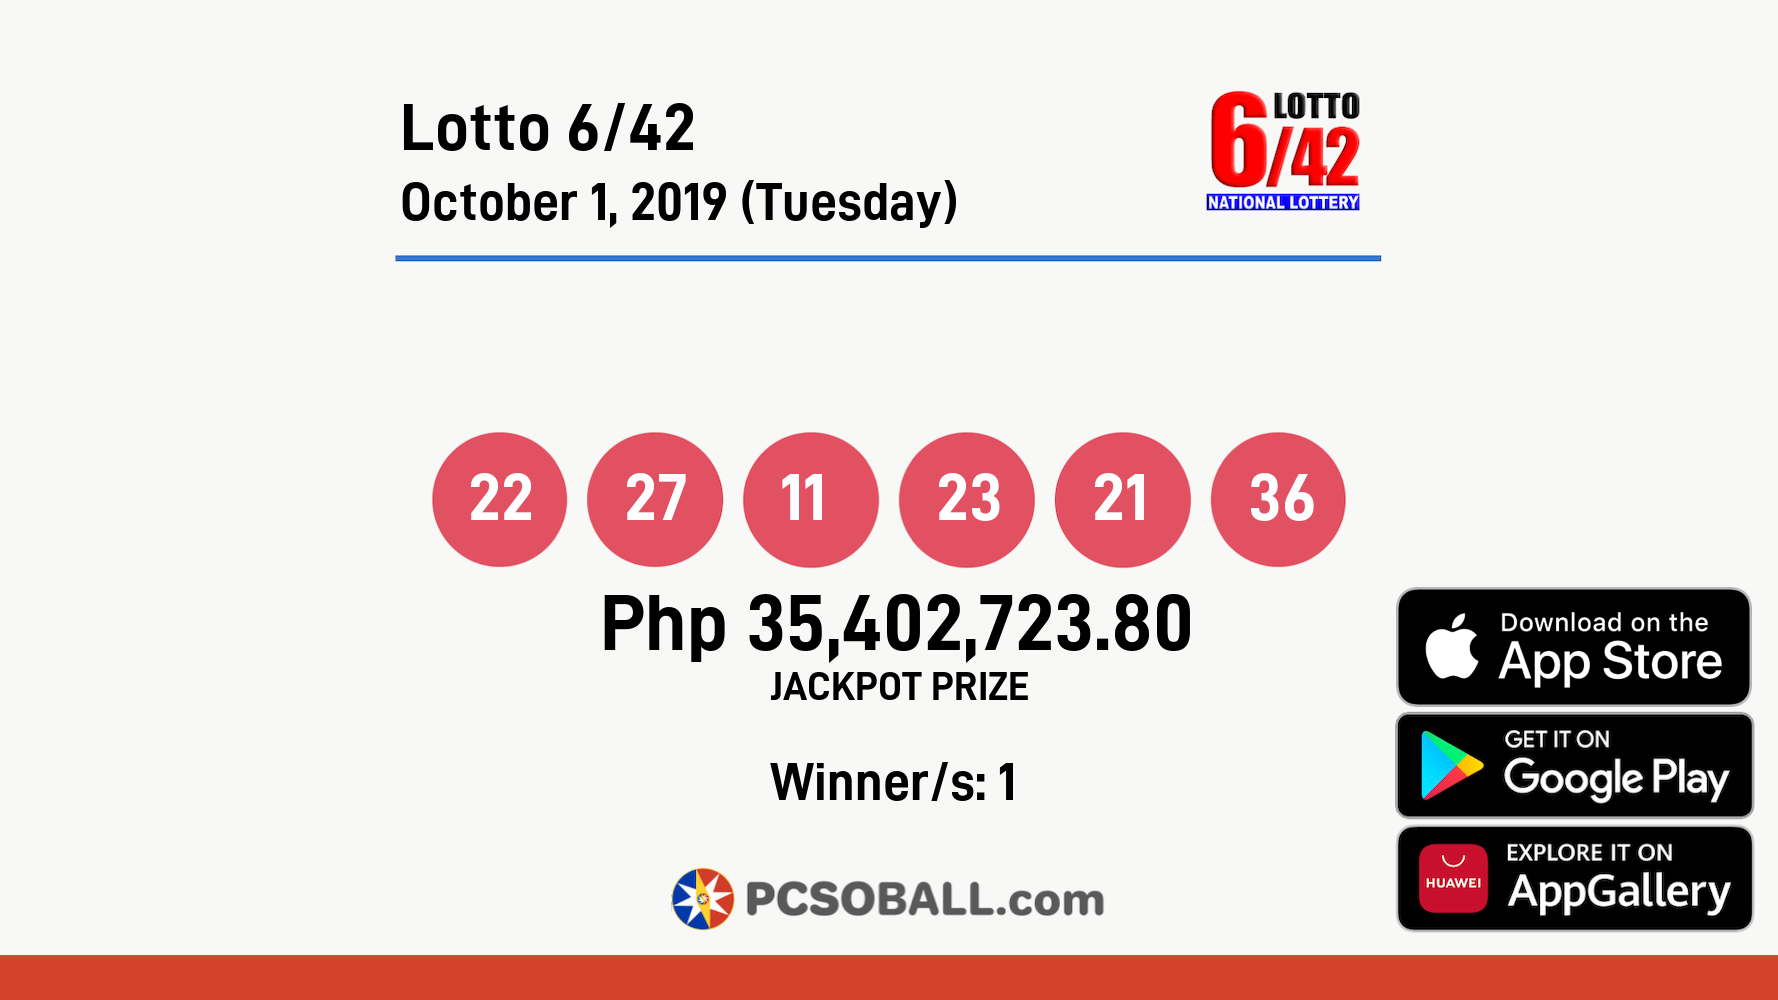 Lotto 6/42 October 1, 2019 (Tuesday) Result